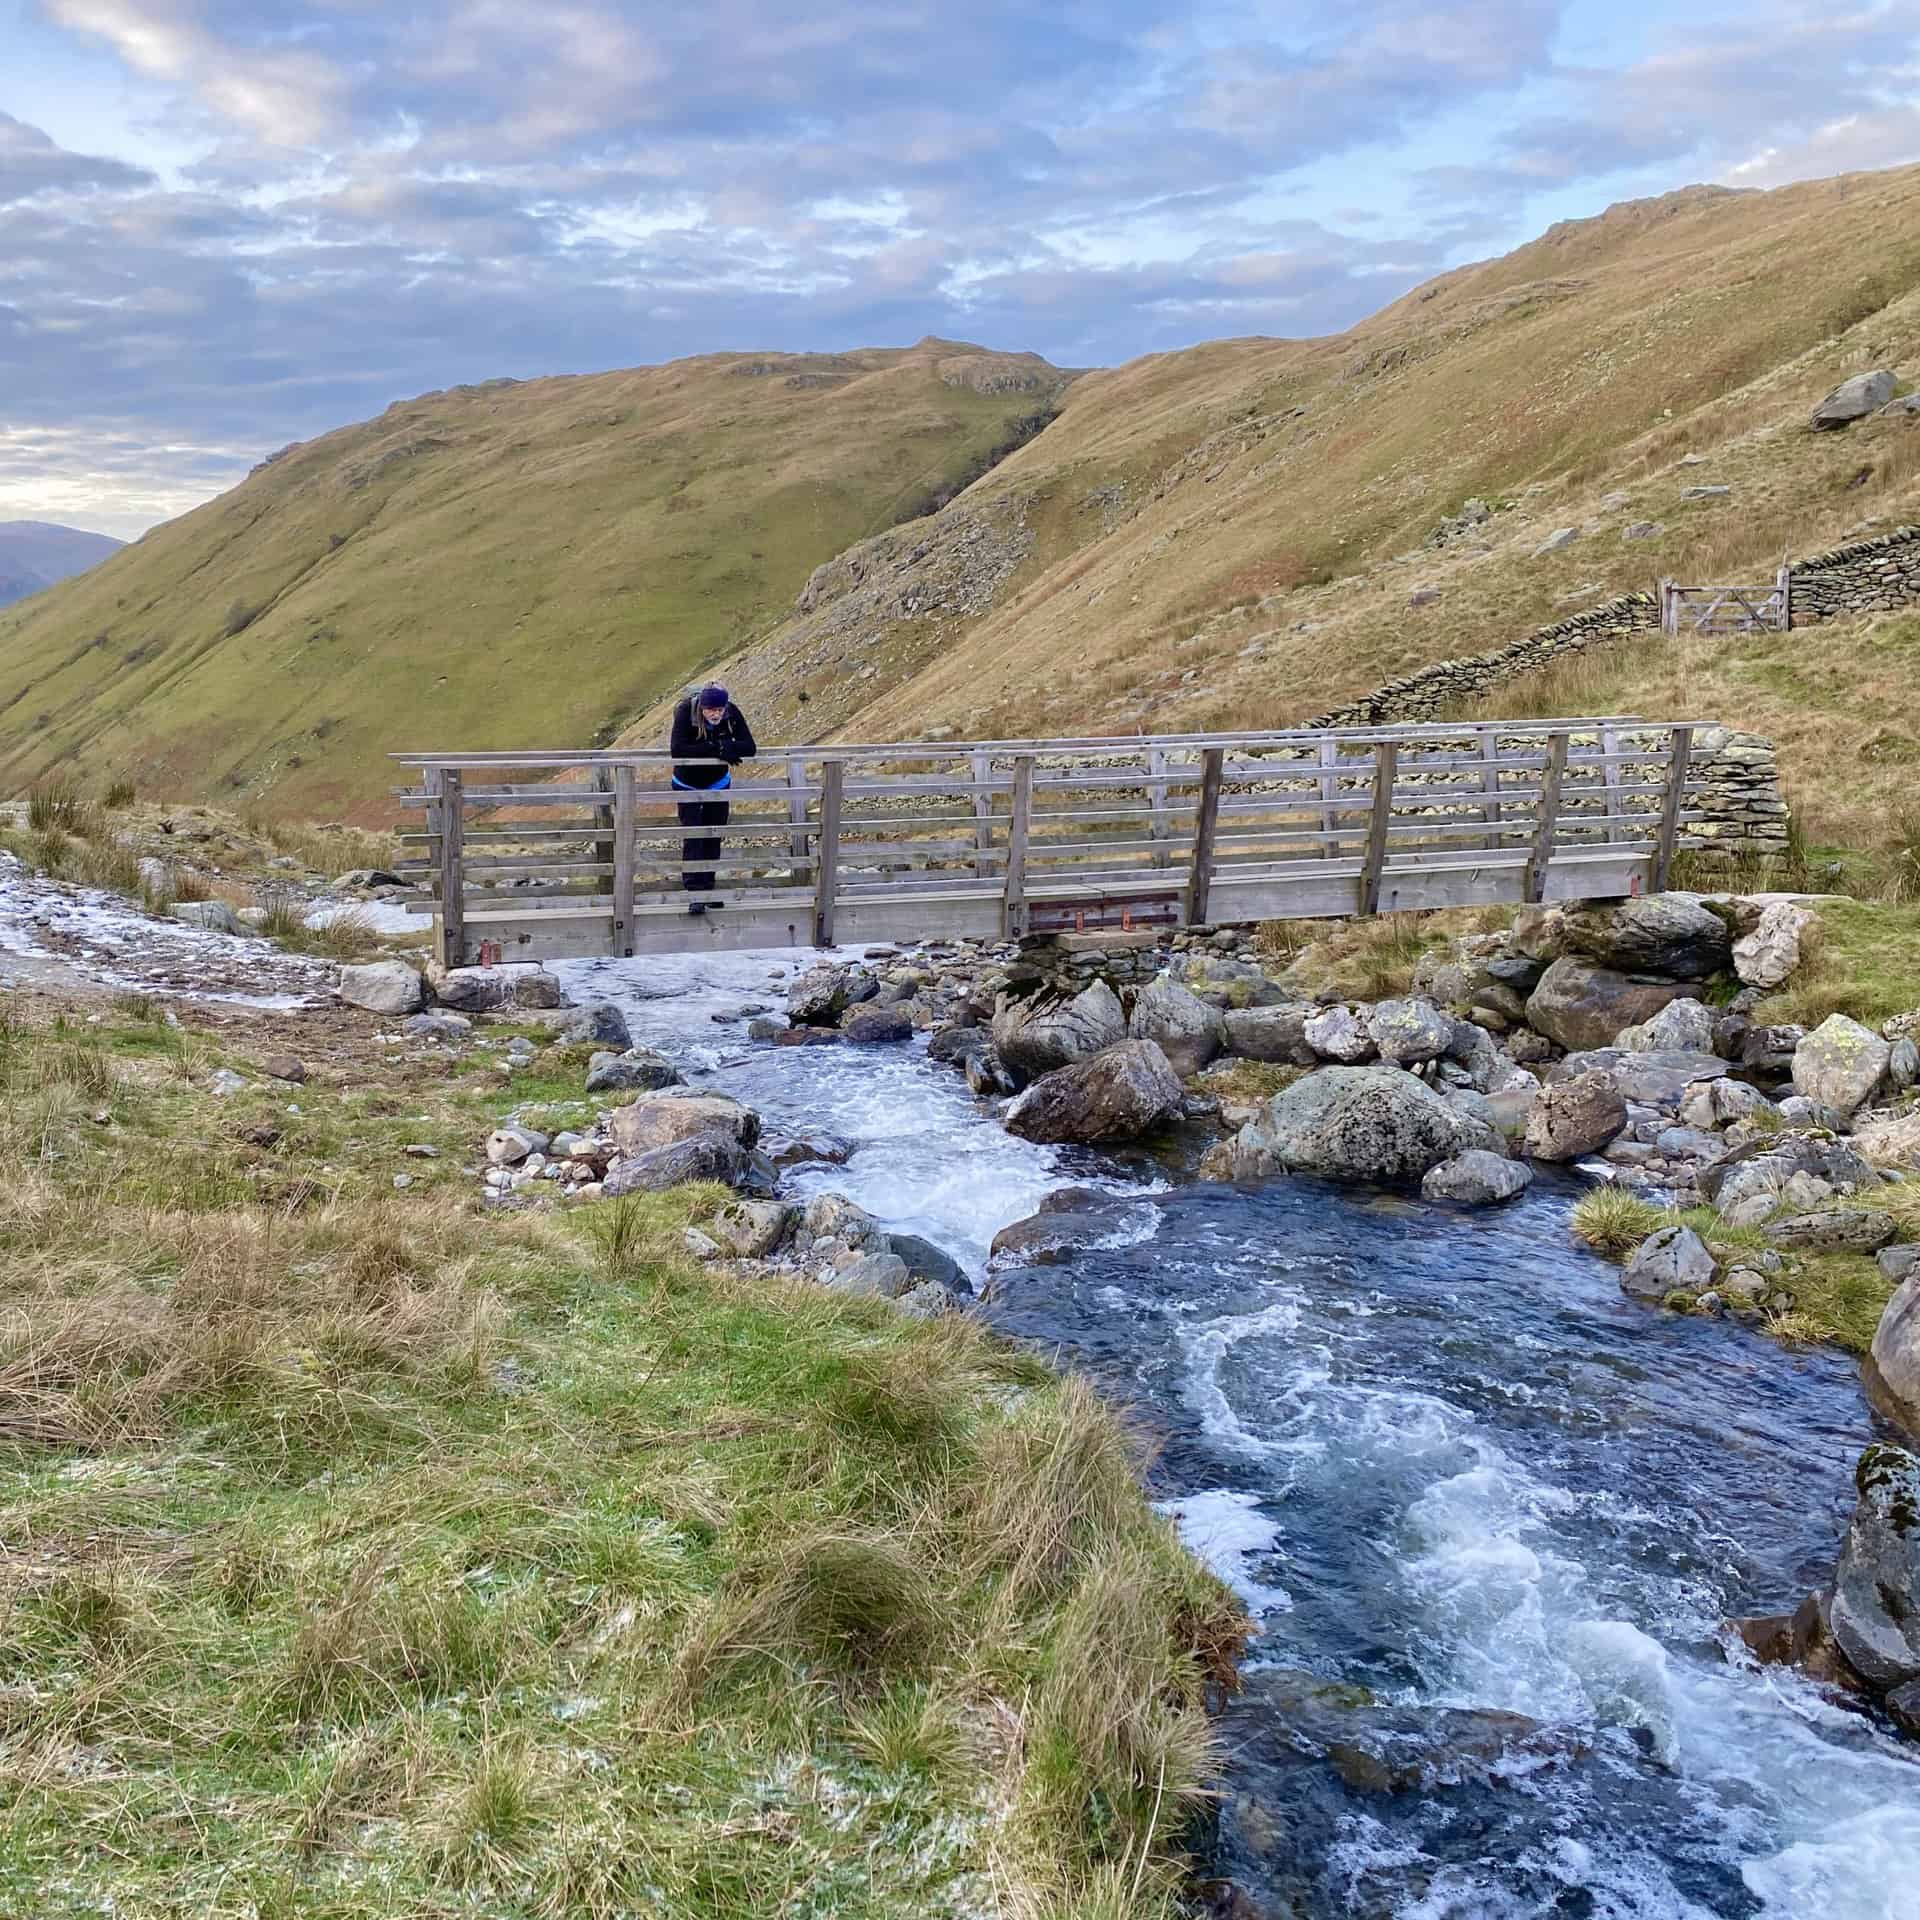 Footbridge across Hayeswater Gill, which flows west towards Hartsop. Along the way it merges with Pasture Beck and Kirkstone Beck and the resulting waters of Goldrill Beck head north and discharge into Ullswater.